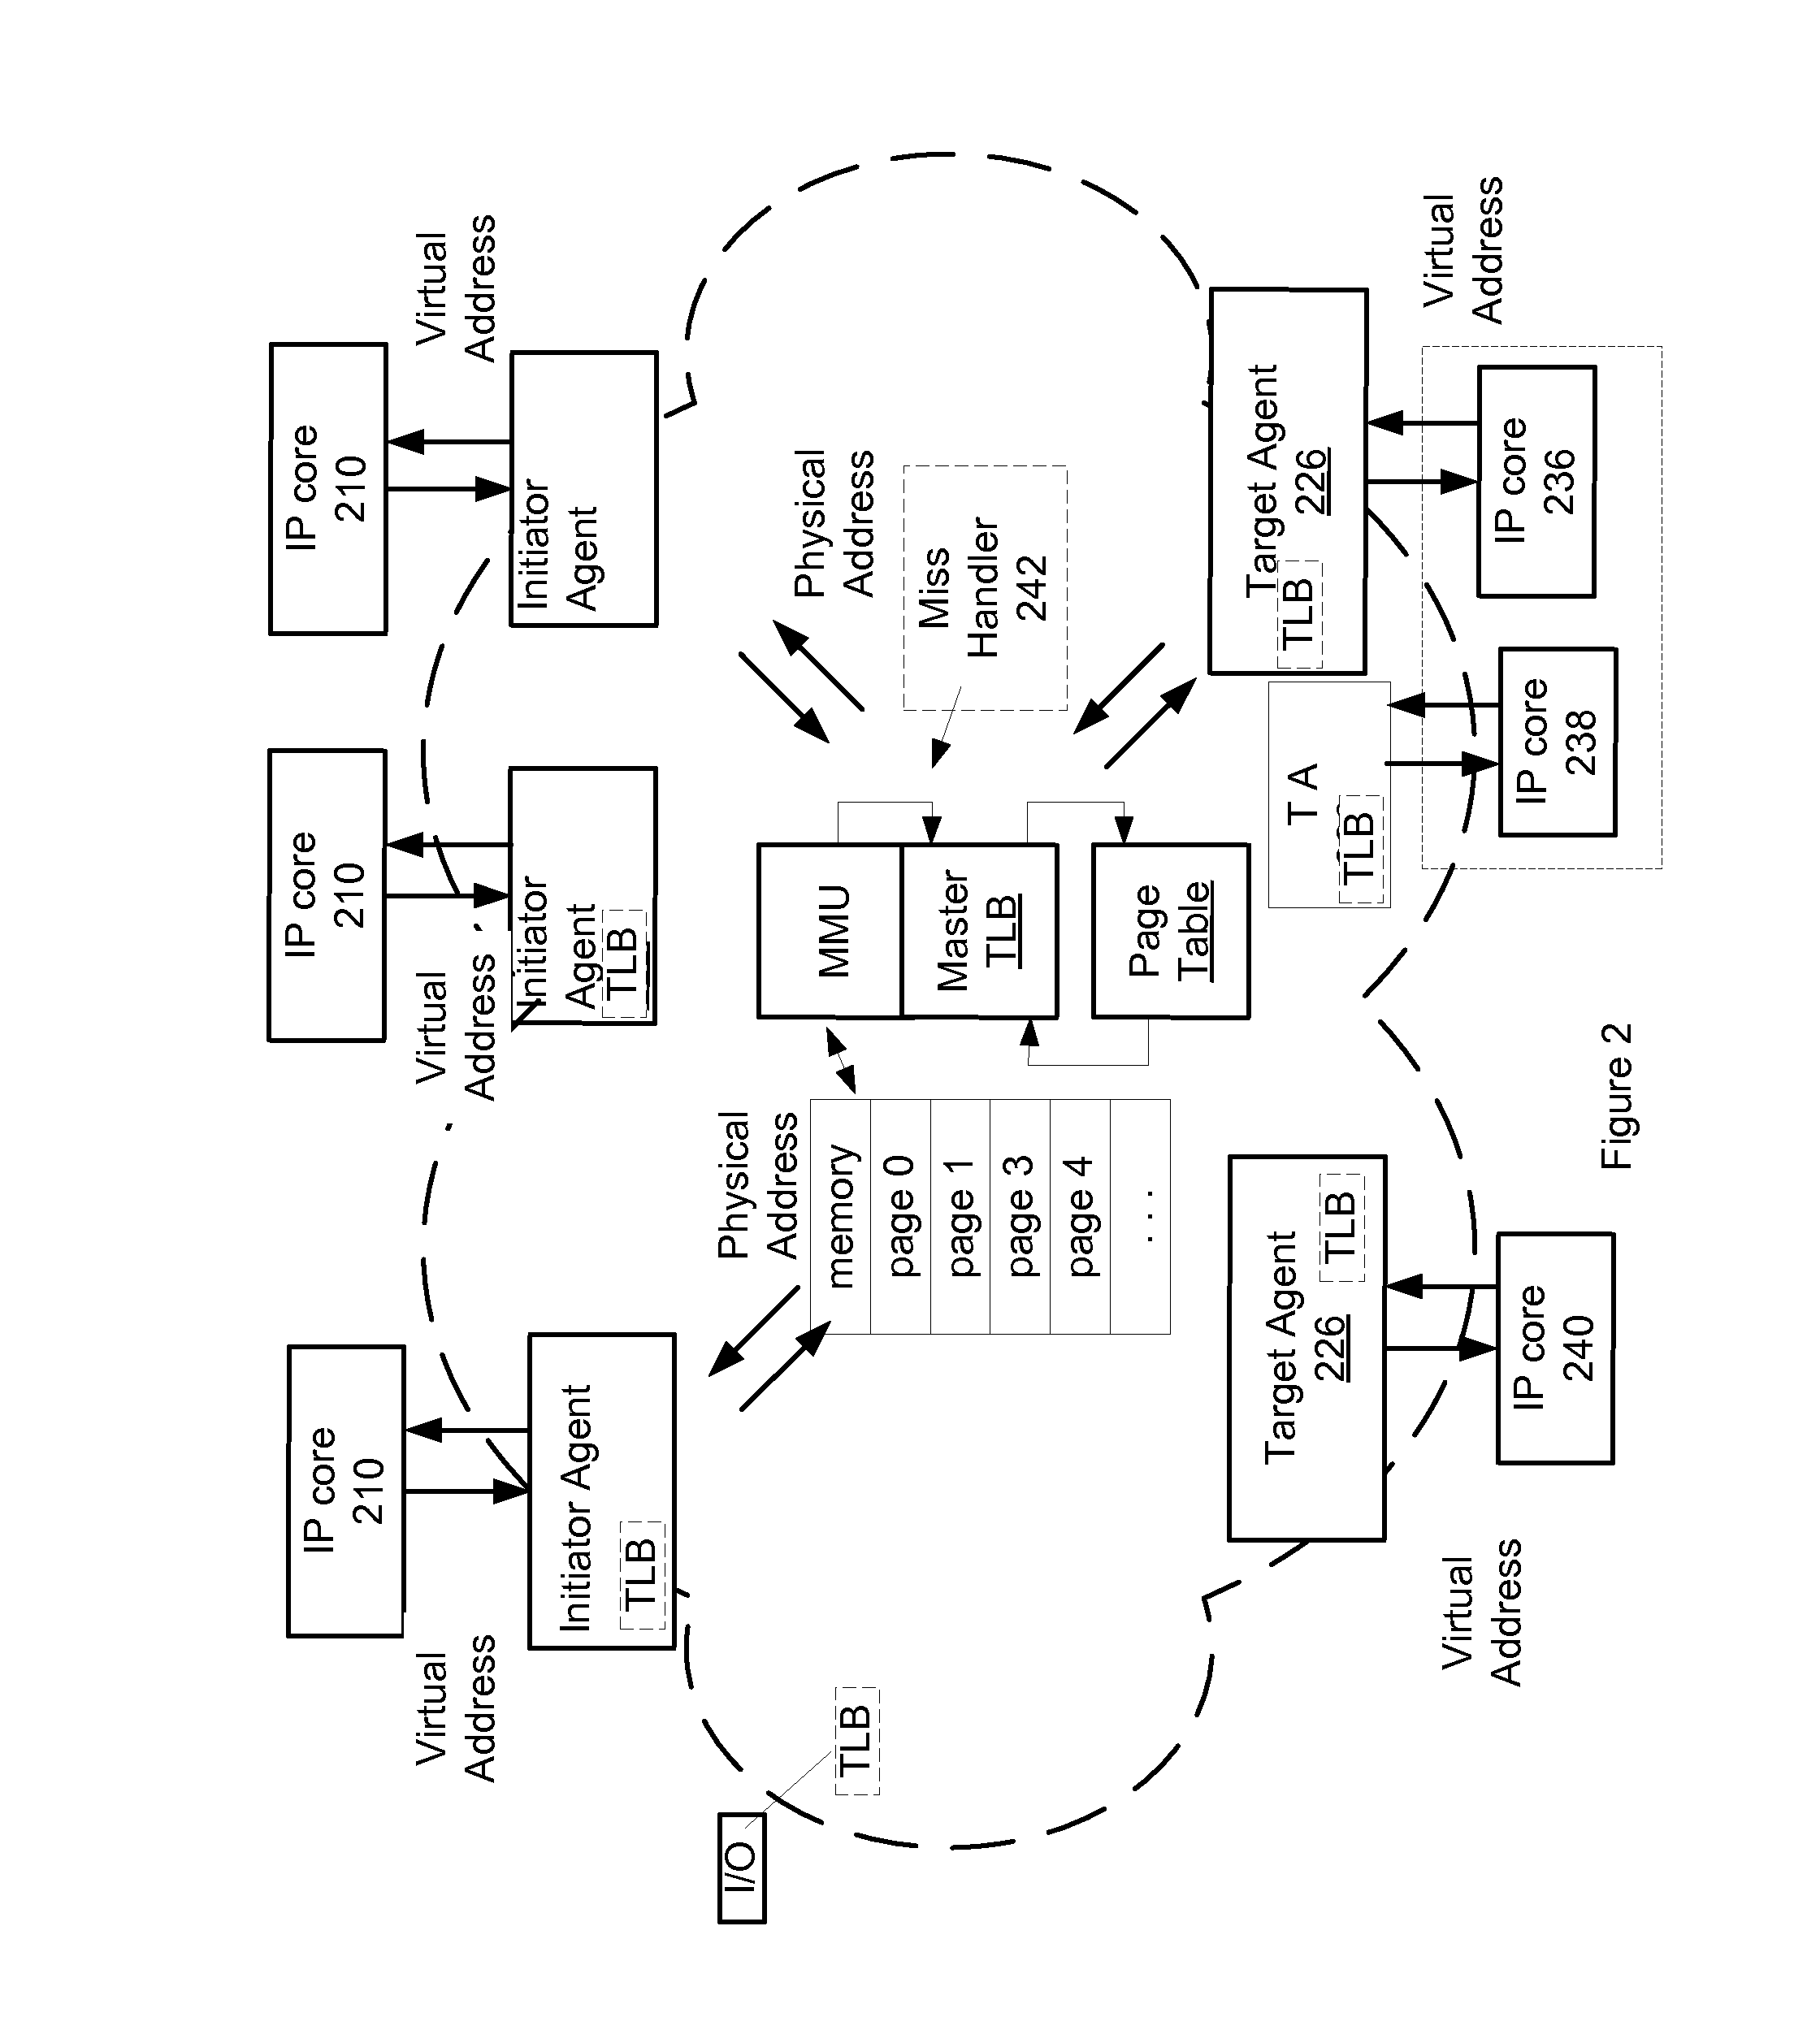 Methods and apparatus for virtualization in an integrated circuit